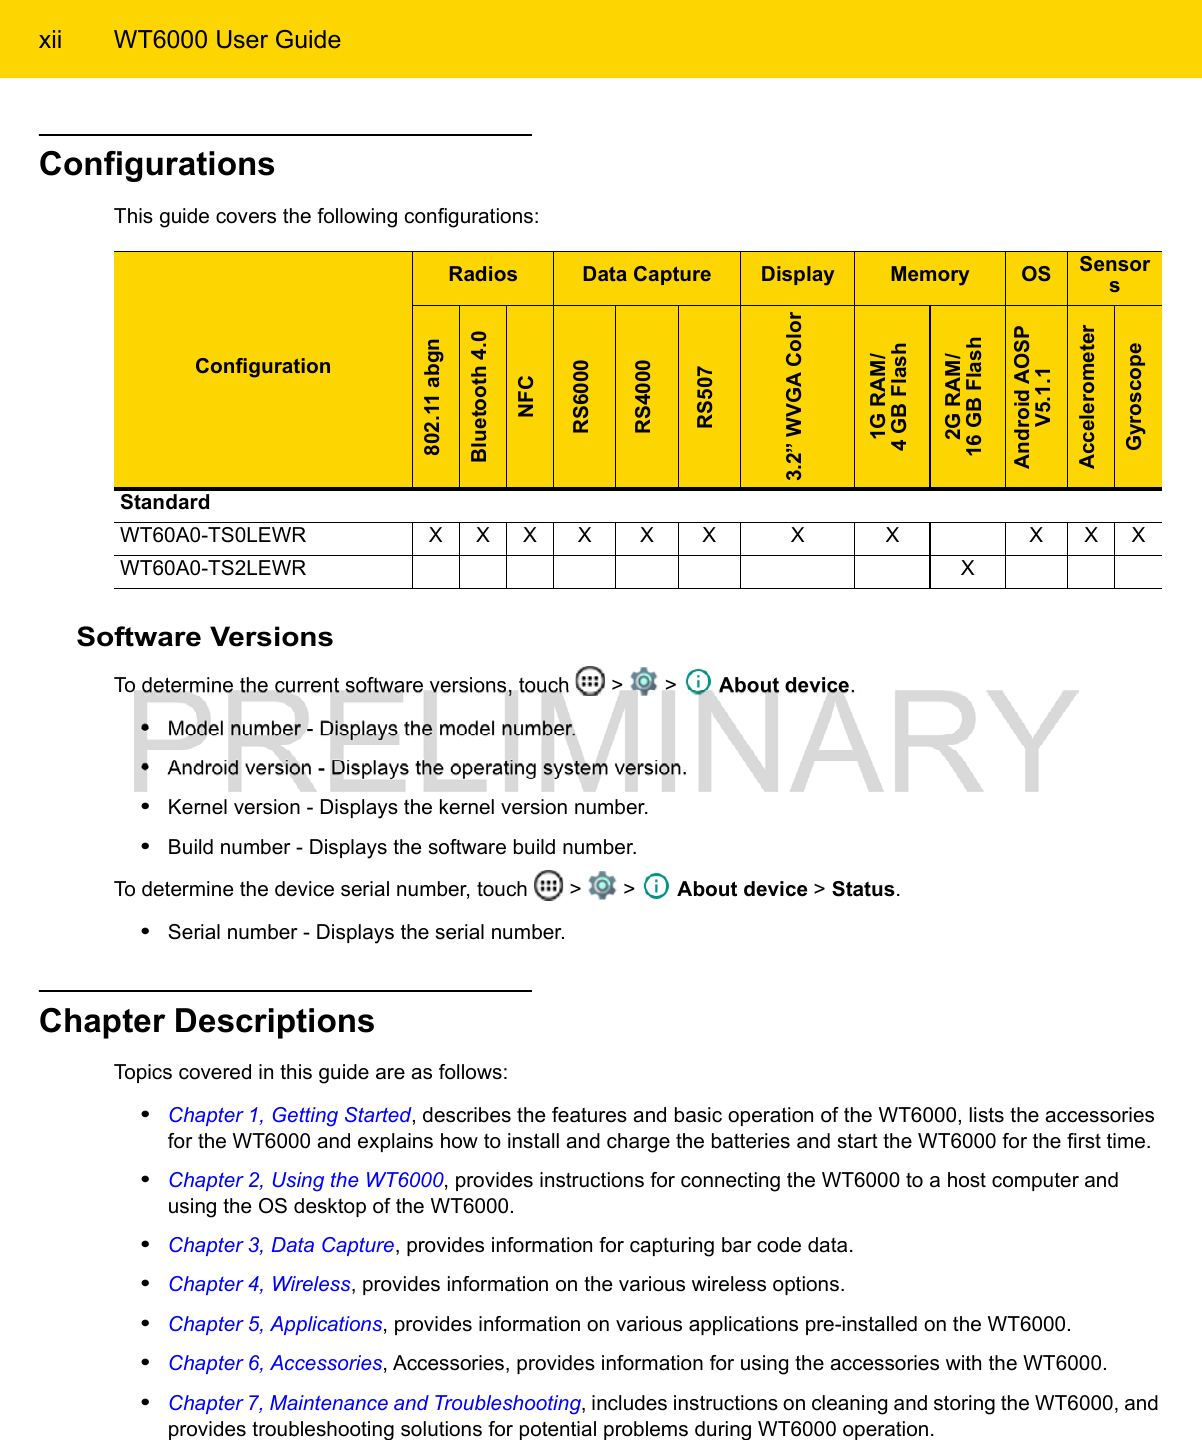 xii WT6000 User GuideConfigurationsThis guide covers the following configurations:Software VersionsTo determine the current software versions, touch   &gt;   &gt;   About device.•Model number - Displays the model number.•Android version - Displays the operating system version.•Kernel version - Displays the kernel version number.•Build number - Displays the software build number.To determine the device serial number, touch   &gt;   &gt;   About device &gt; Status.•Serial number - Displays the serial number.Chapter DescriptionsTopics covered in this guide are as follows:•Chapter 1, Getting Started, describes the features and basic operation of the WT6000, lists the accessories for the WT6000 and explains how to install and charge the batteries and start the WT6000 for the first time.•Chapter 2, Using the WT6000, provides instructions for connecting the WT6000 to a host computer and using the OS desktop of the WT6000.•Chapter 3, Data Capture, provides information for capturing bar code data.•Chapter 4, Wireless, provides information on the various wireless options.•Chapter 5, Applications, provides information on various applications pre-installed on the WT6000.•Chapter 6, Accessories, Accessories, provides information for using the accessories with the WT6000.•Chapter 7, Maintenance and Troubleshooting, includes instructions on cleaning and storing the WT6000, and provides troubleshooting solutions for potential problems during WT6000 operation.ConfigurationRadios Data Capture Display Memory OS Sensors802.11 abgnBluetooth 4.0NFCRS6000RS4000RS5073.2” WVGA Color1G RAM/4 GB Flash2G RAM/16 GB FlashAndroid AOSPV5.1.1AccelerometerGyroscopeStandardWT60A0-TS0LEWR X X X X X X X X X X XWT60A0-TS2LEWR X